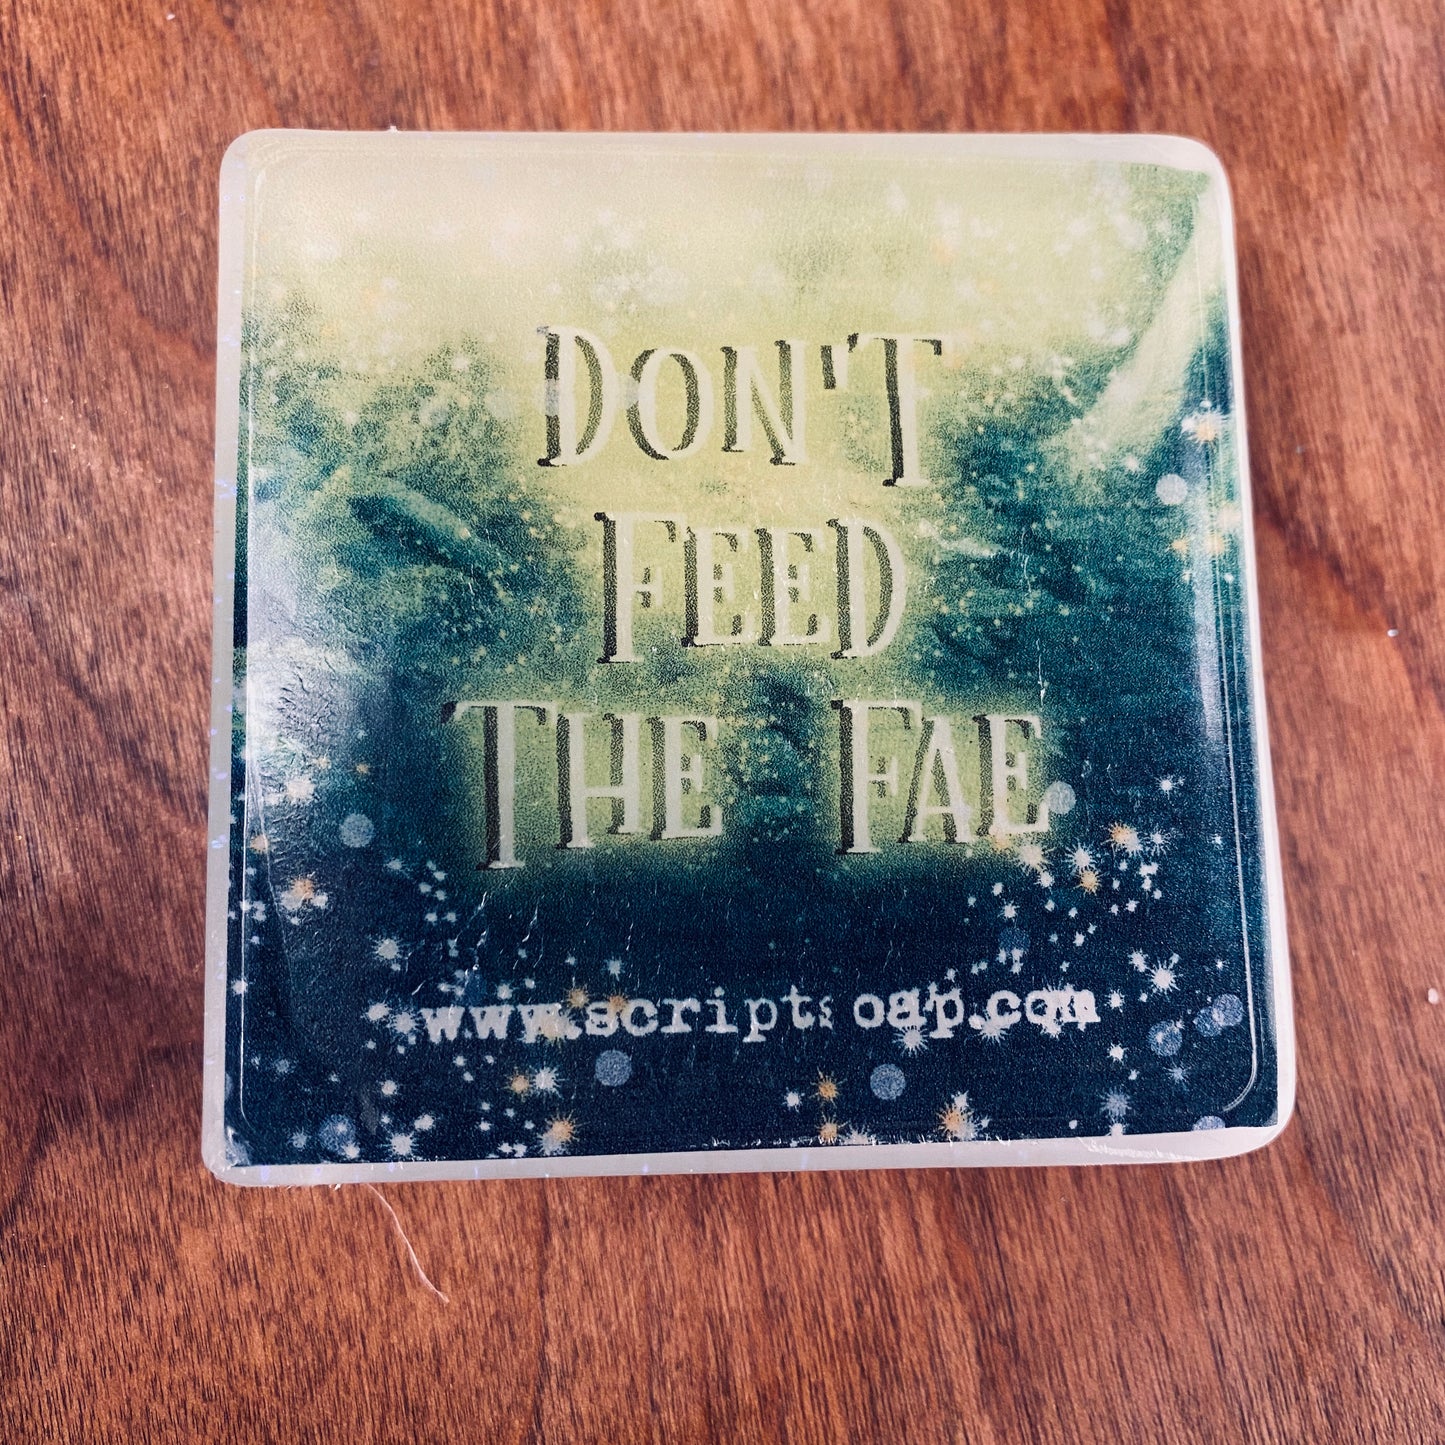 DON'T FEED THE FAE Script Soap